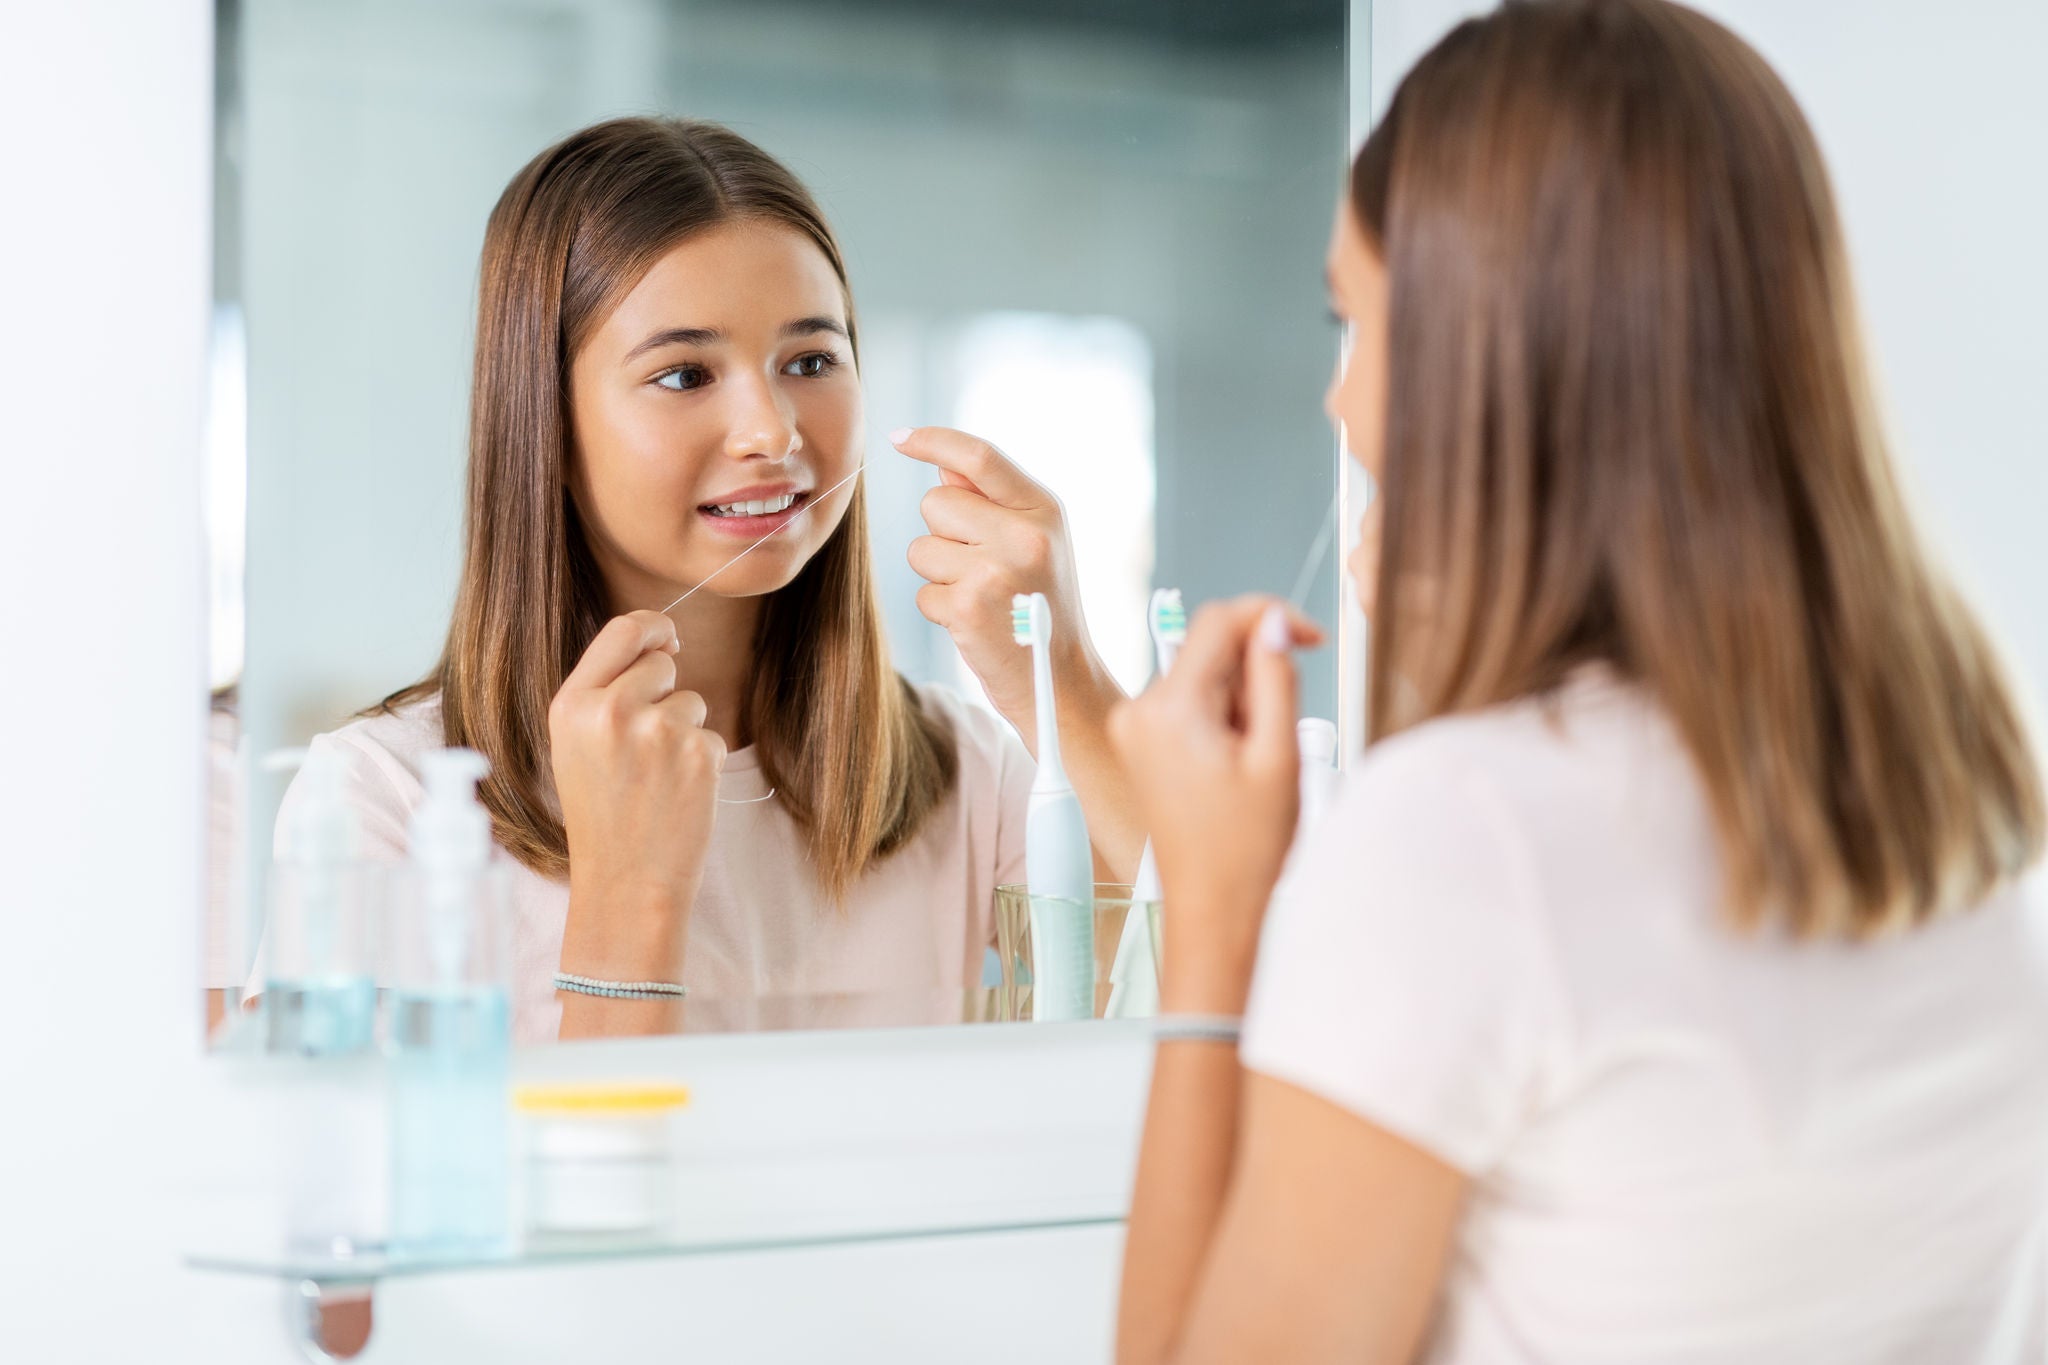 dental care, hygiene and people concept - happy smiling teenage girl with floss cleaning teeth and looking in mirror at bathroom